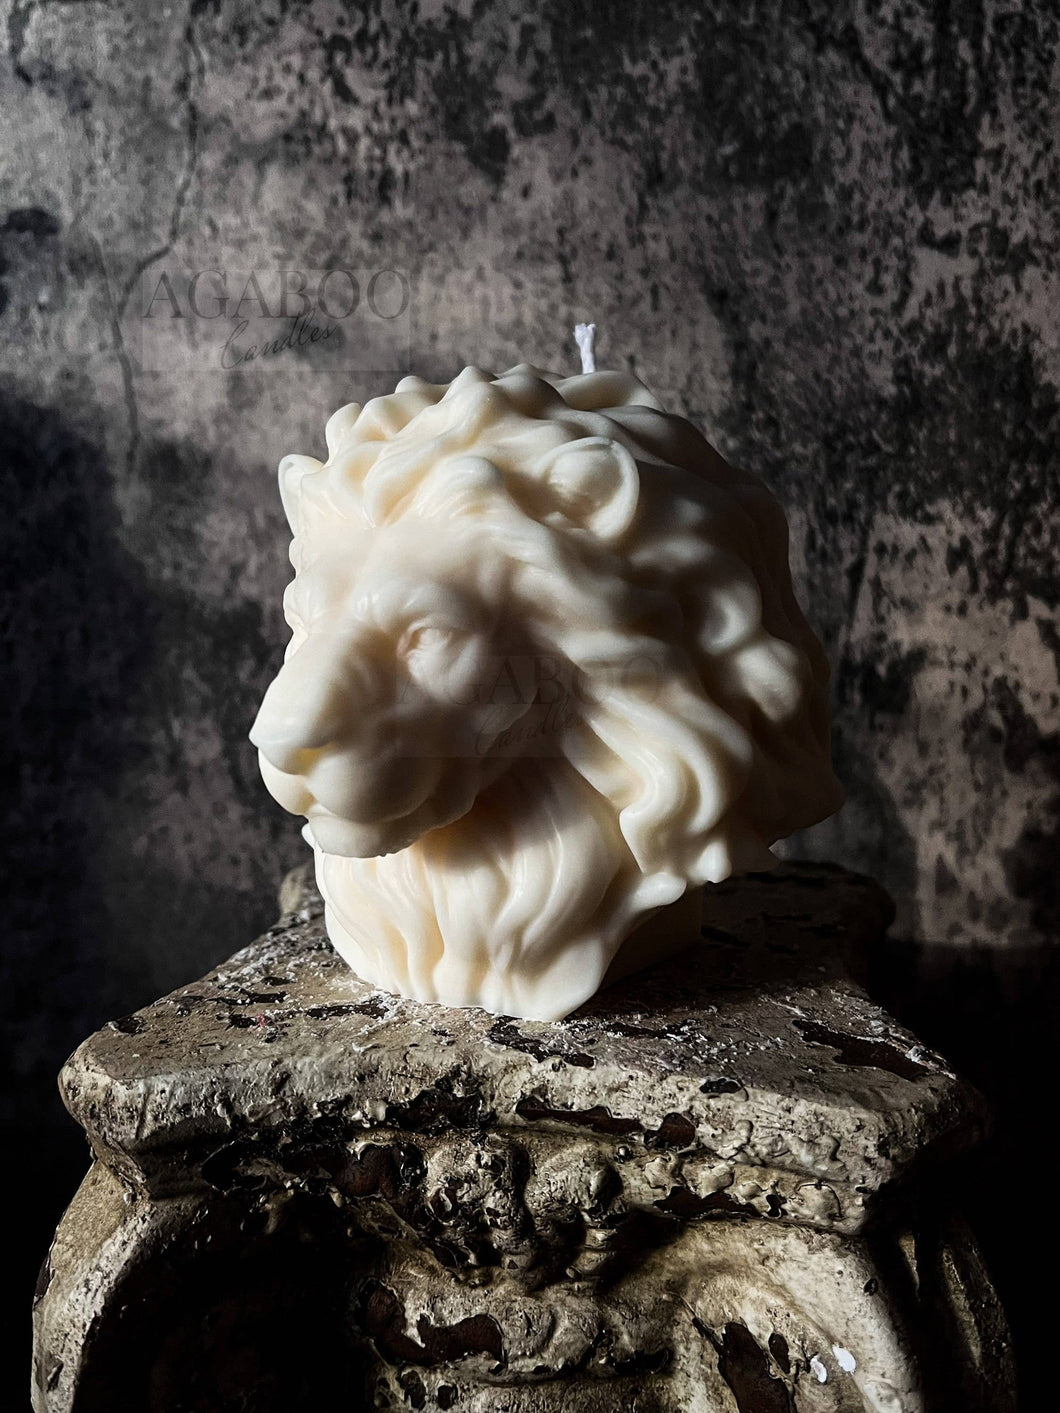 Agaboo Candle - Large Lion Head Candle: Unscented / Cream